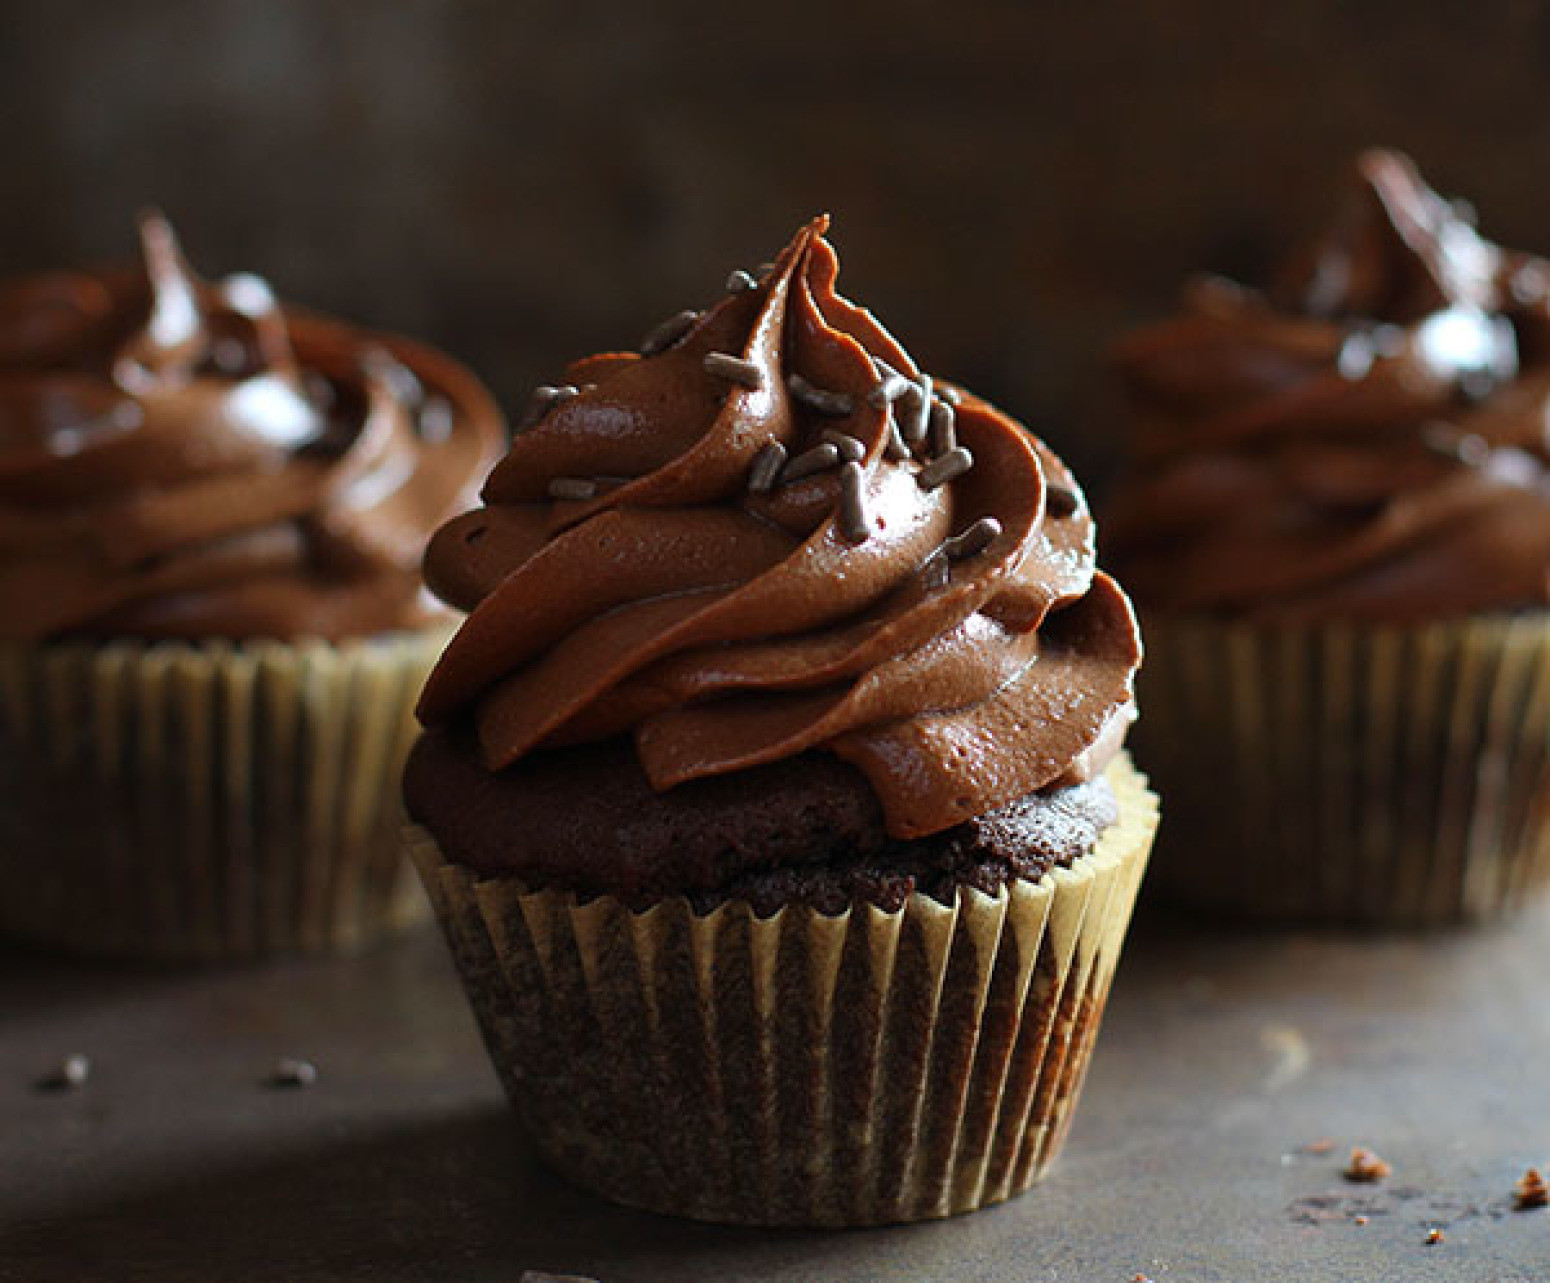 Chocolate Cupcakes With Cream Cheese Frosting
 Ultimate Chocolate Cupcakes with Ultimate Chocolate Cream